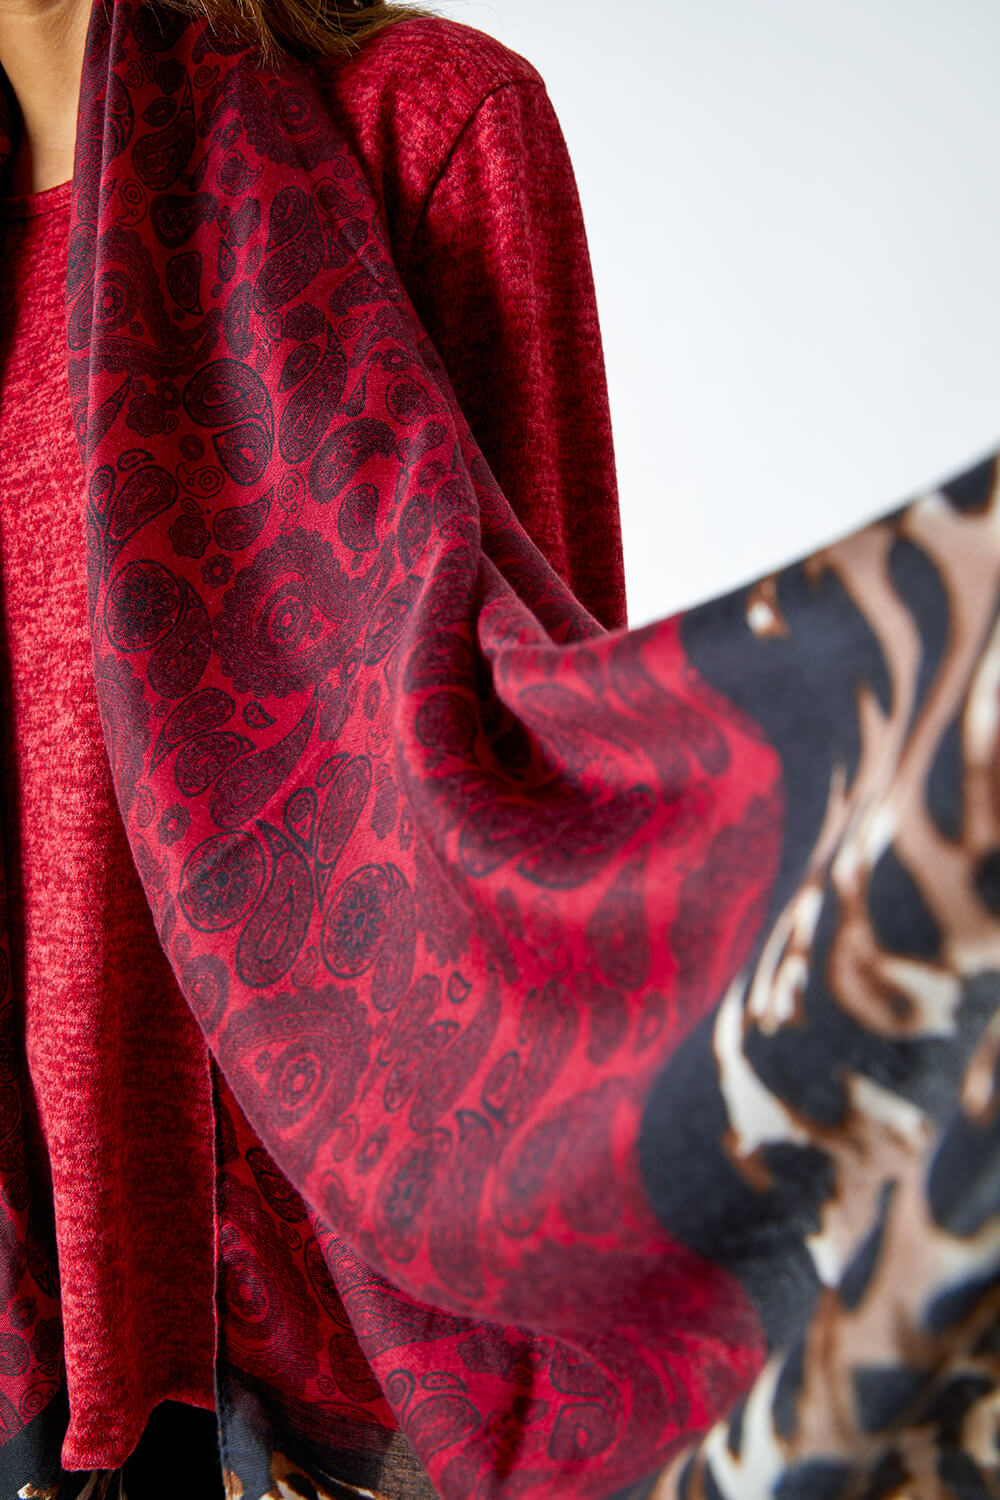 Red Stretch Top with Animal Print Scarf, Image 5 of 5